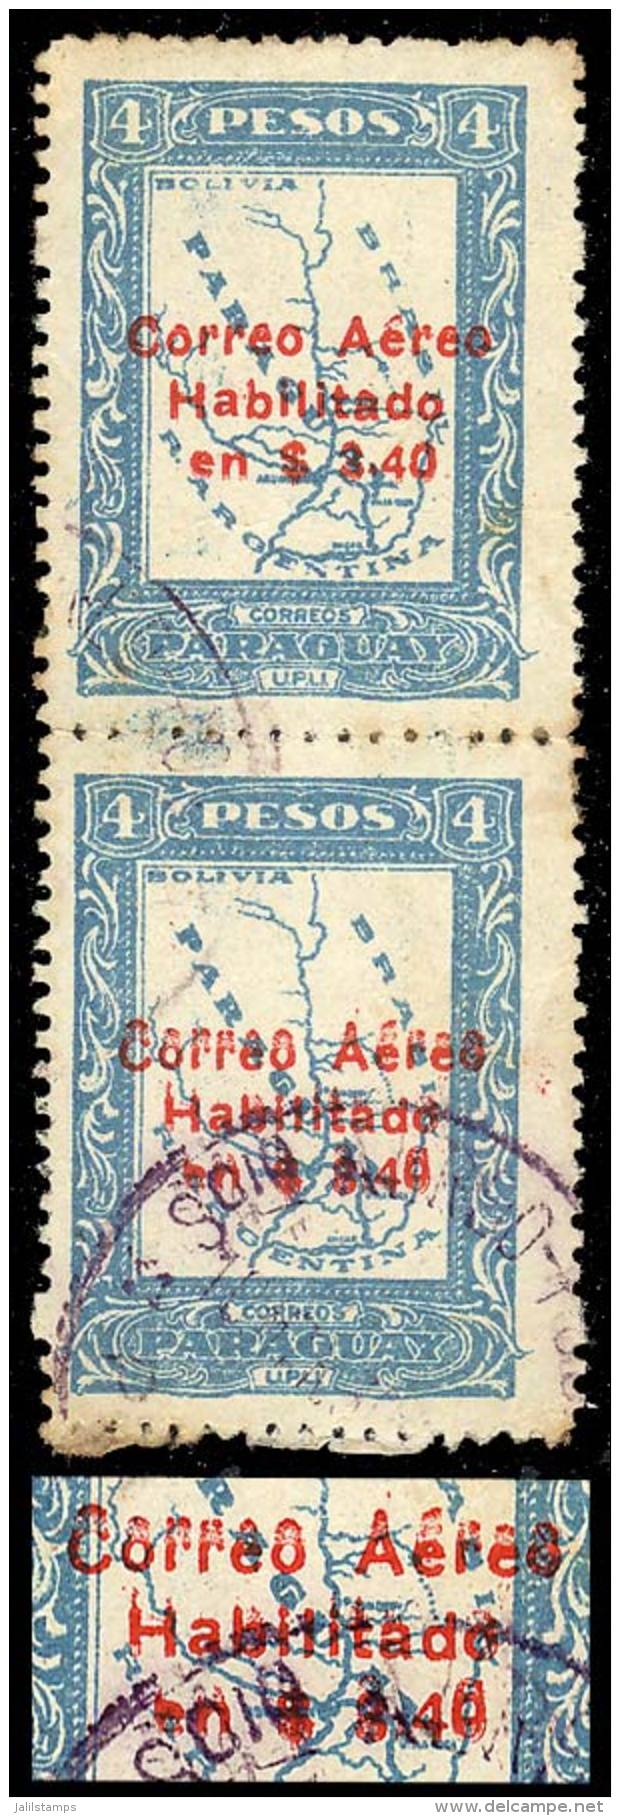 Sc.C5, Vertical Pair, The Lower Stamp With DOUBLE OVERPRINT Variety, VF Quality, Very Rare! - Paraguay